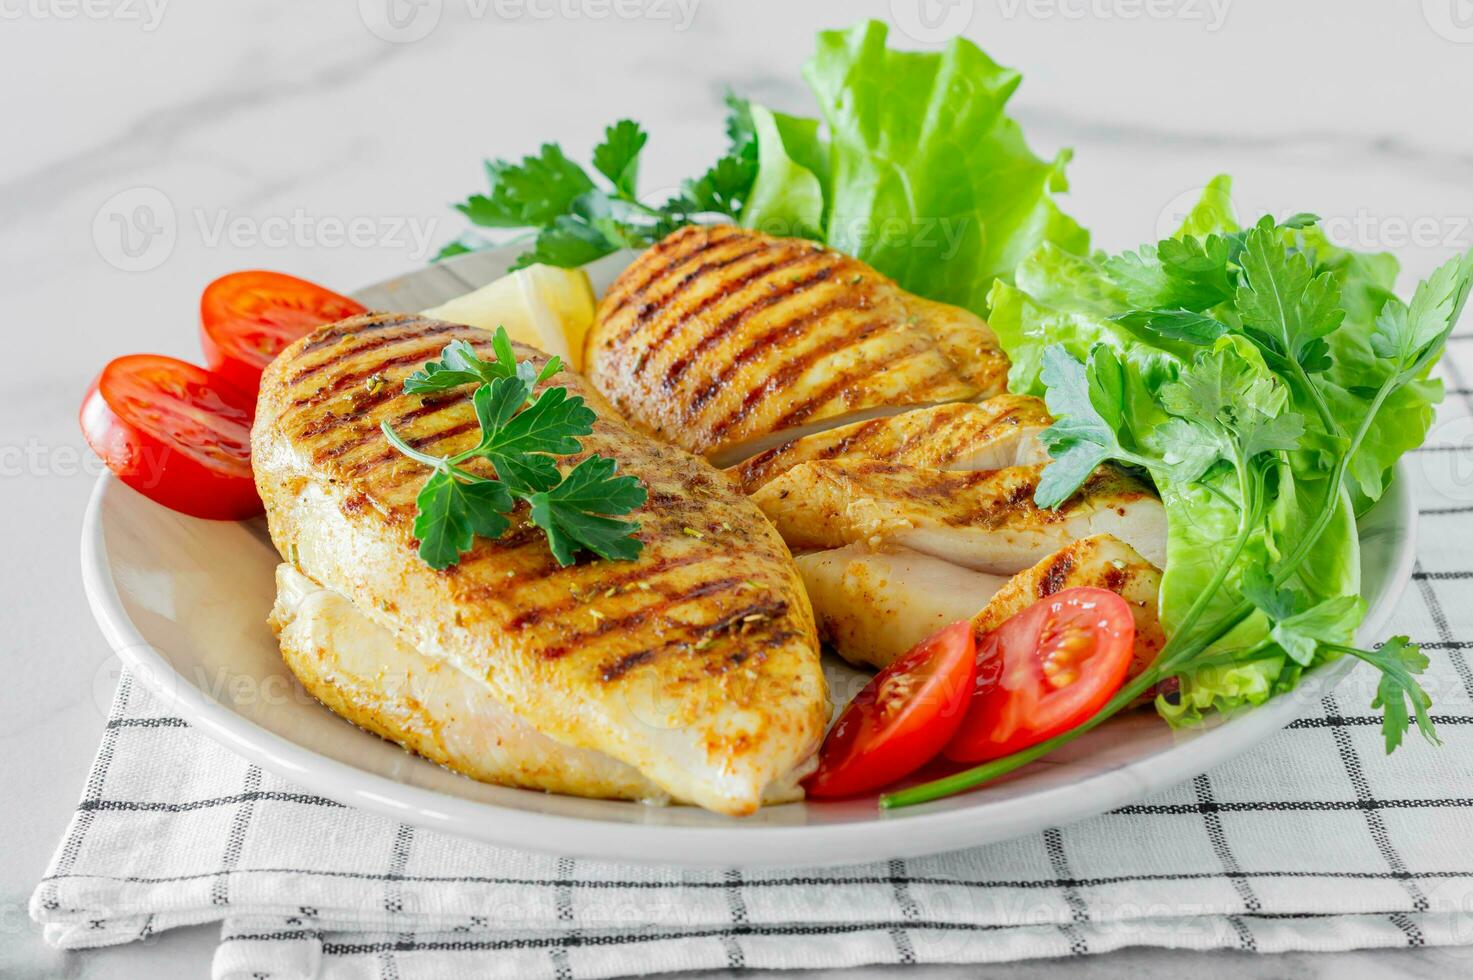 Grilled chicken breasts served on a plate with salad and vegetables. Dietary food photo